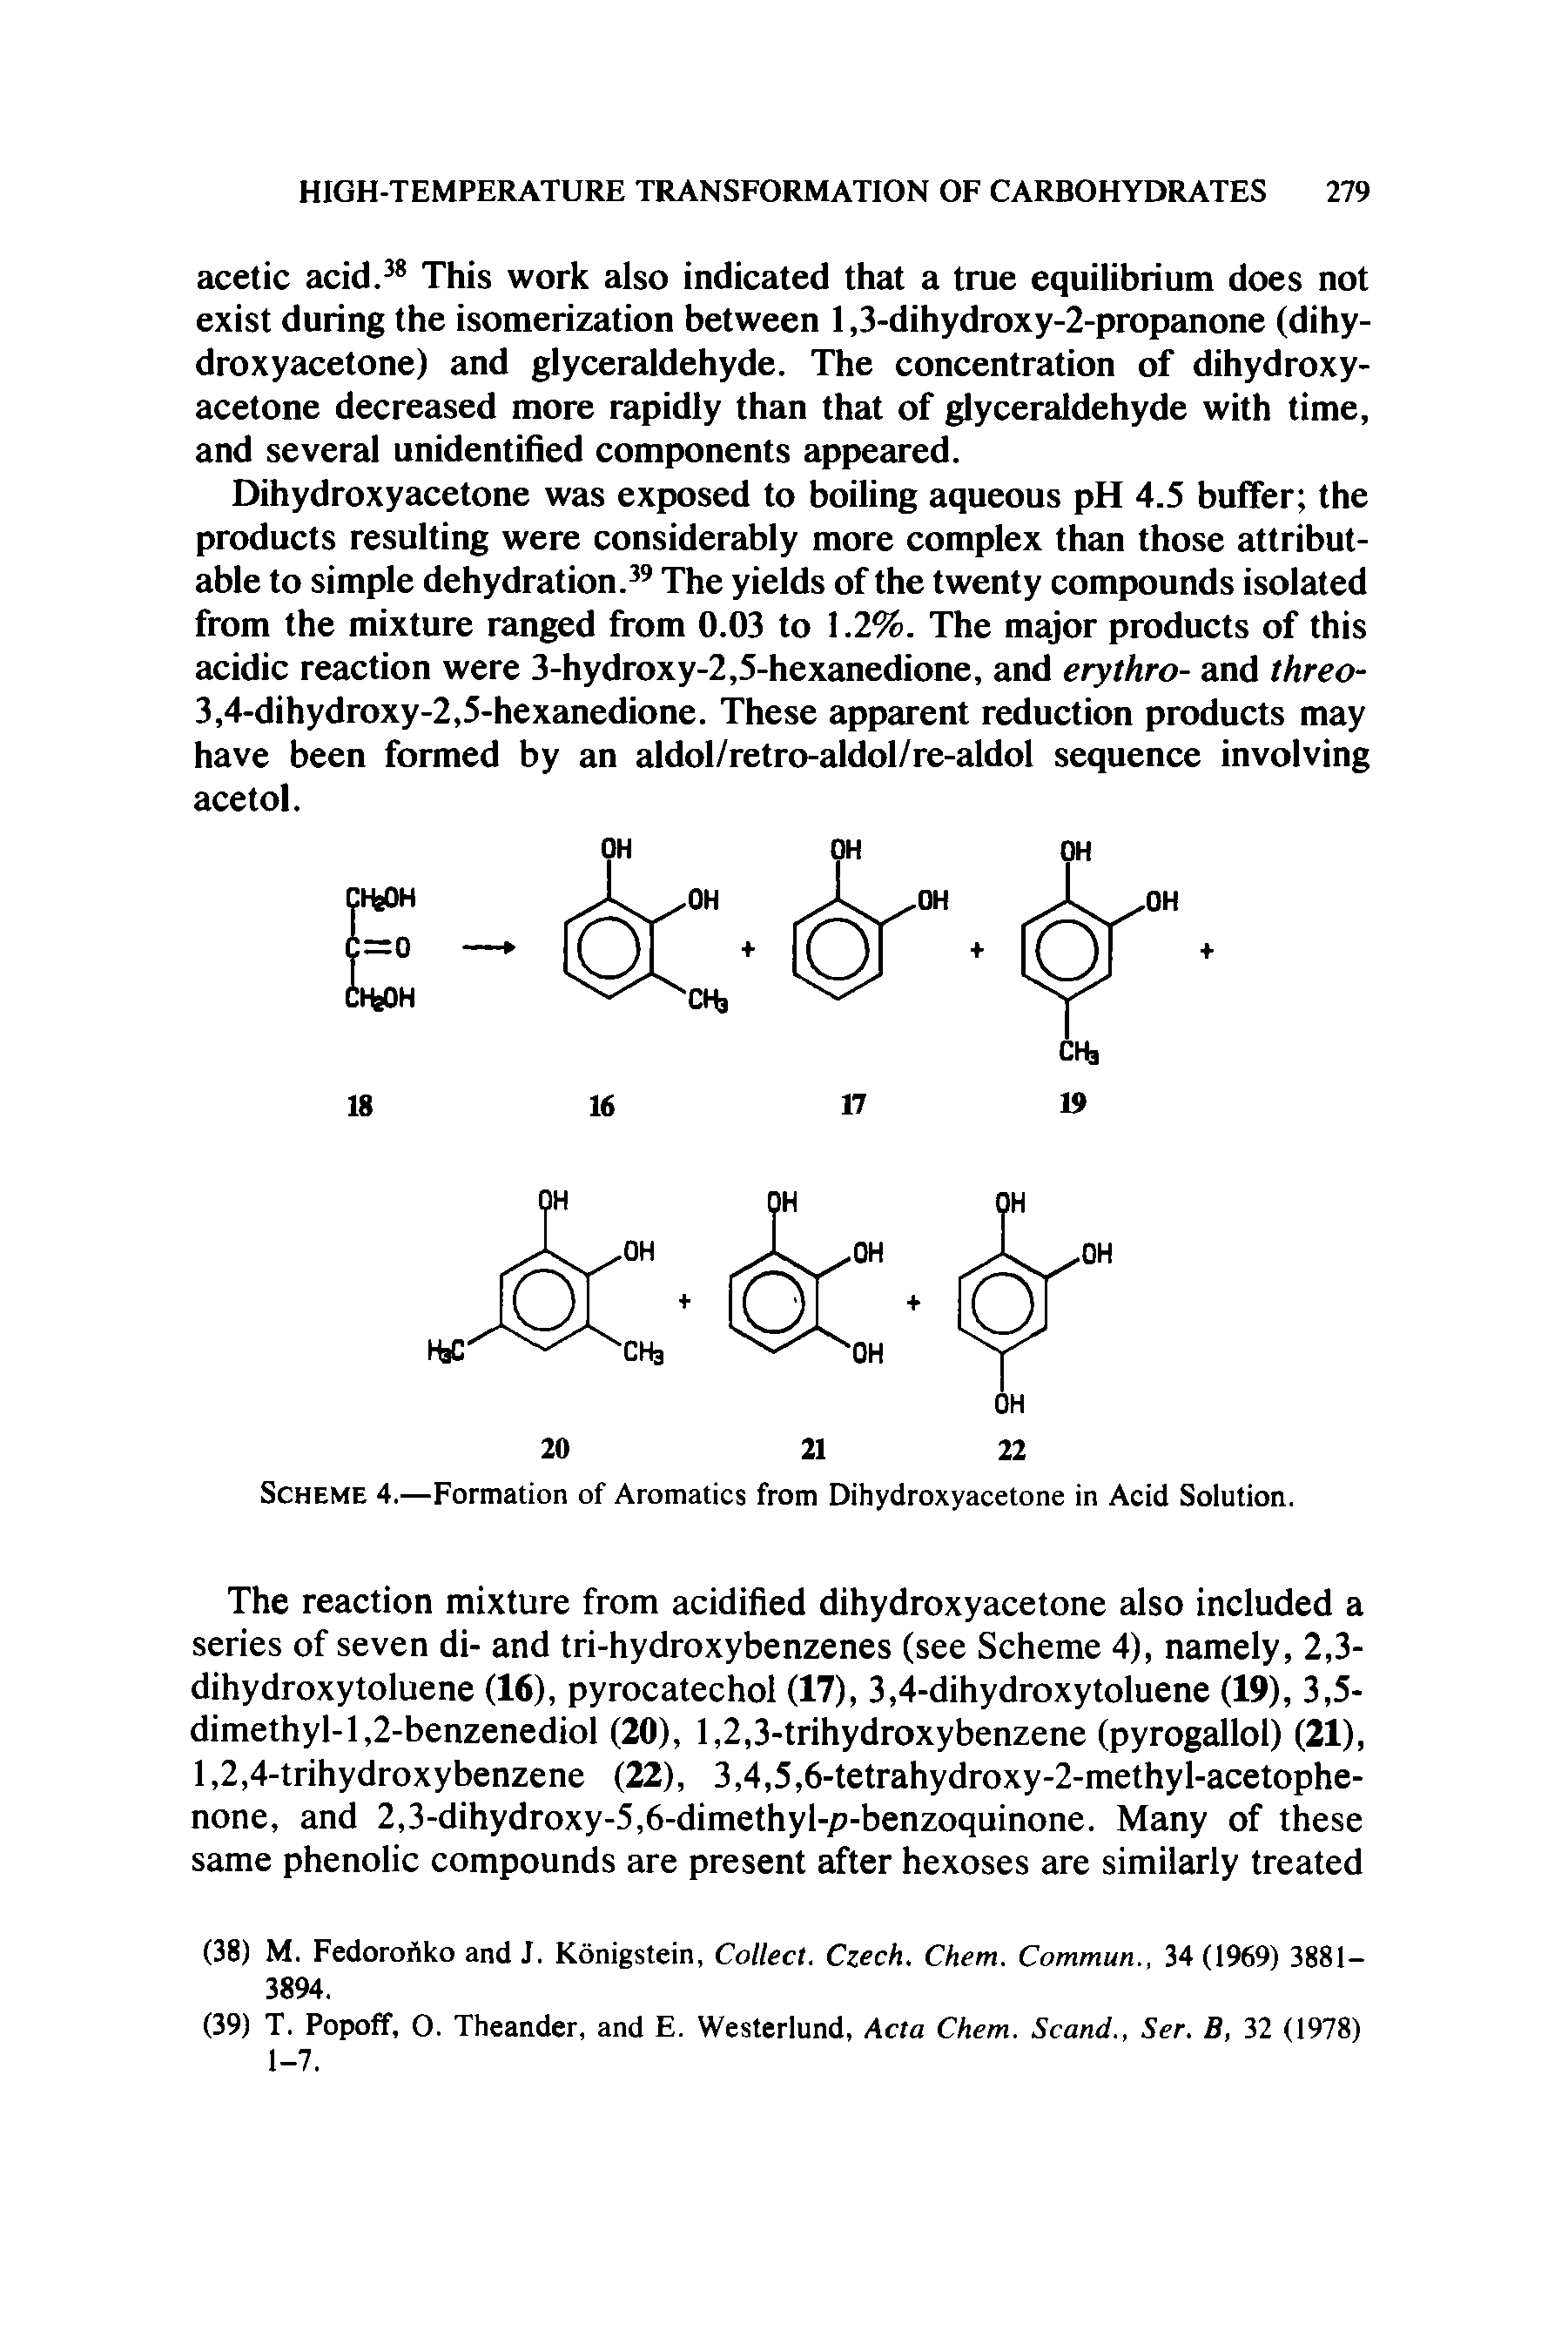 Scheme 4.—Formation of Aromatics from Dihydroxyacetone in Acid Solution.